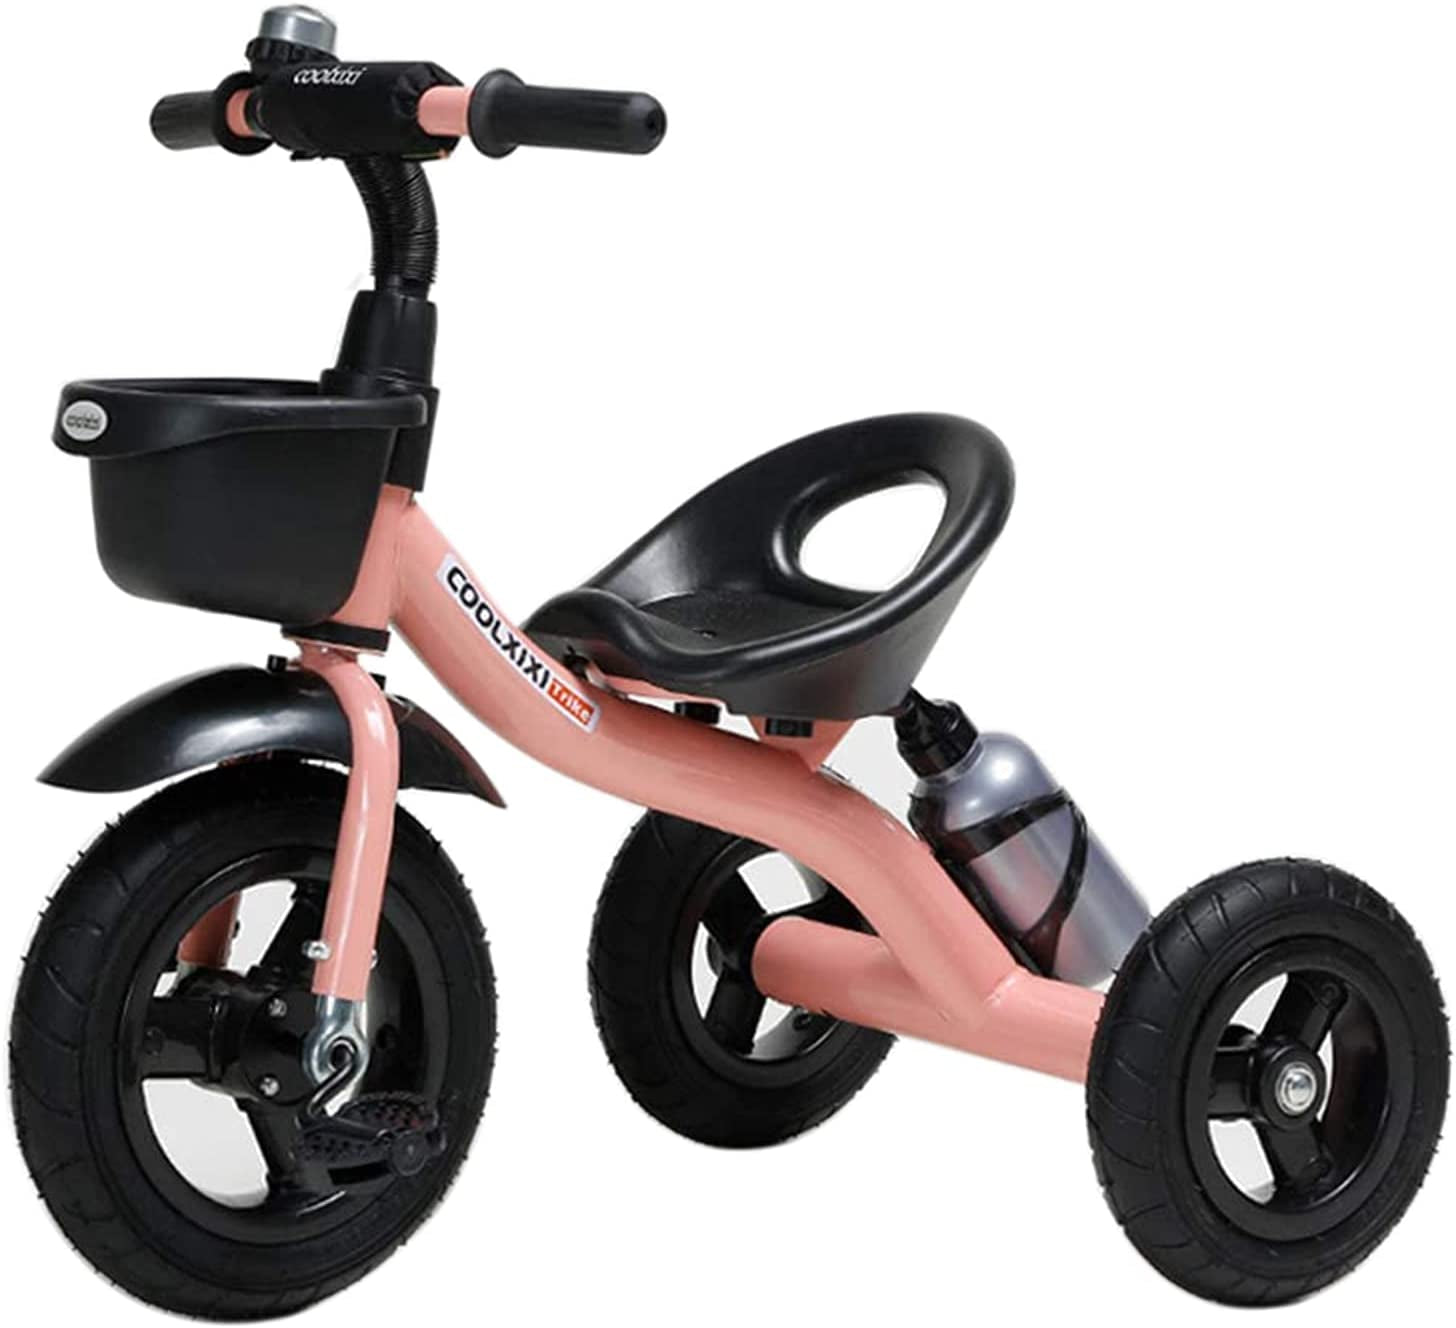 Kids Trike Toddlers Children Tricycle Stroller Trike 3 Wheel Pedal Bike Multicolor for 3 4 5 Years Old Boys Girls Indoor & Outdoor with Storage Bin and Cup Holder (Pink)